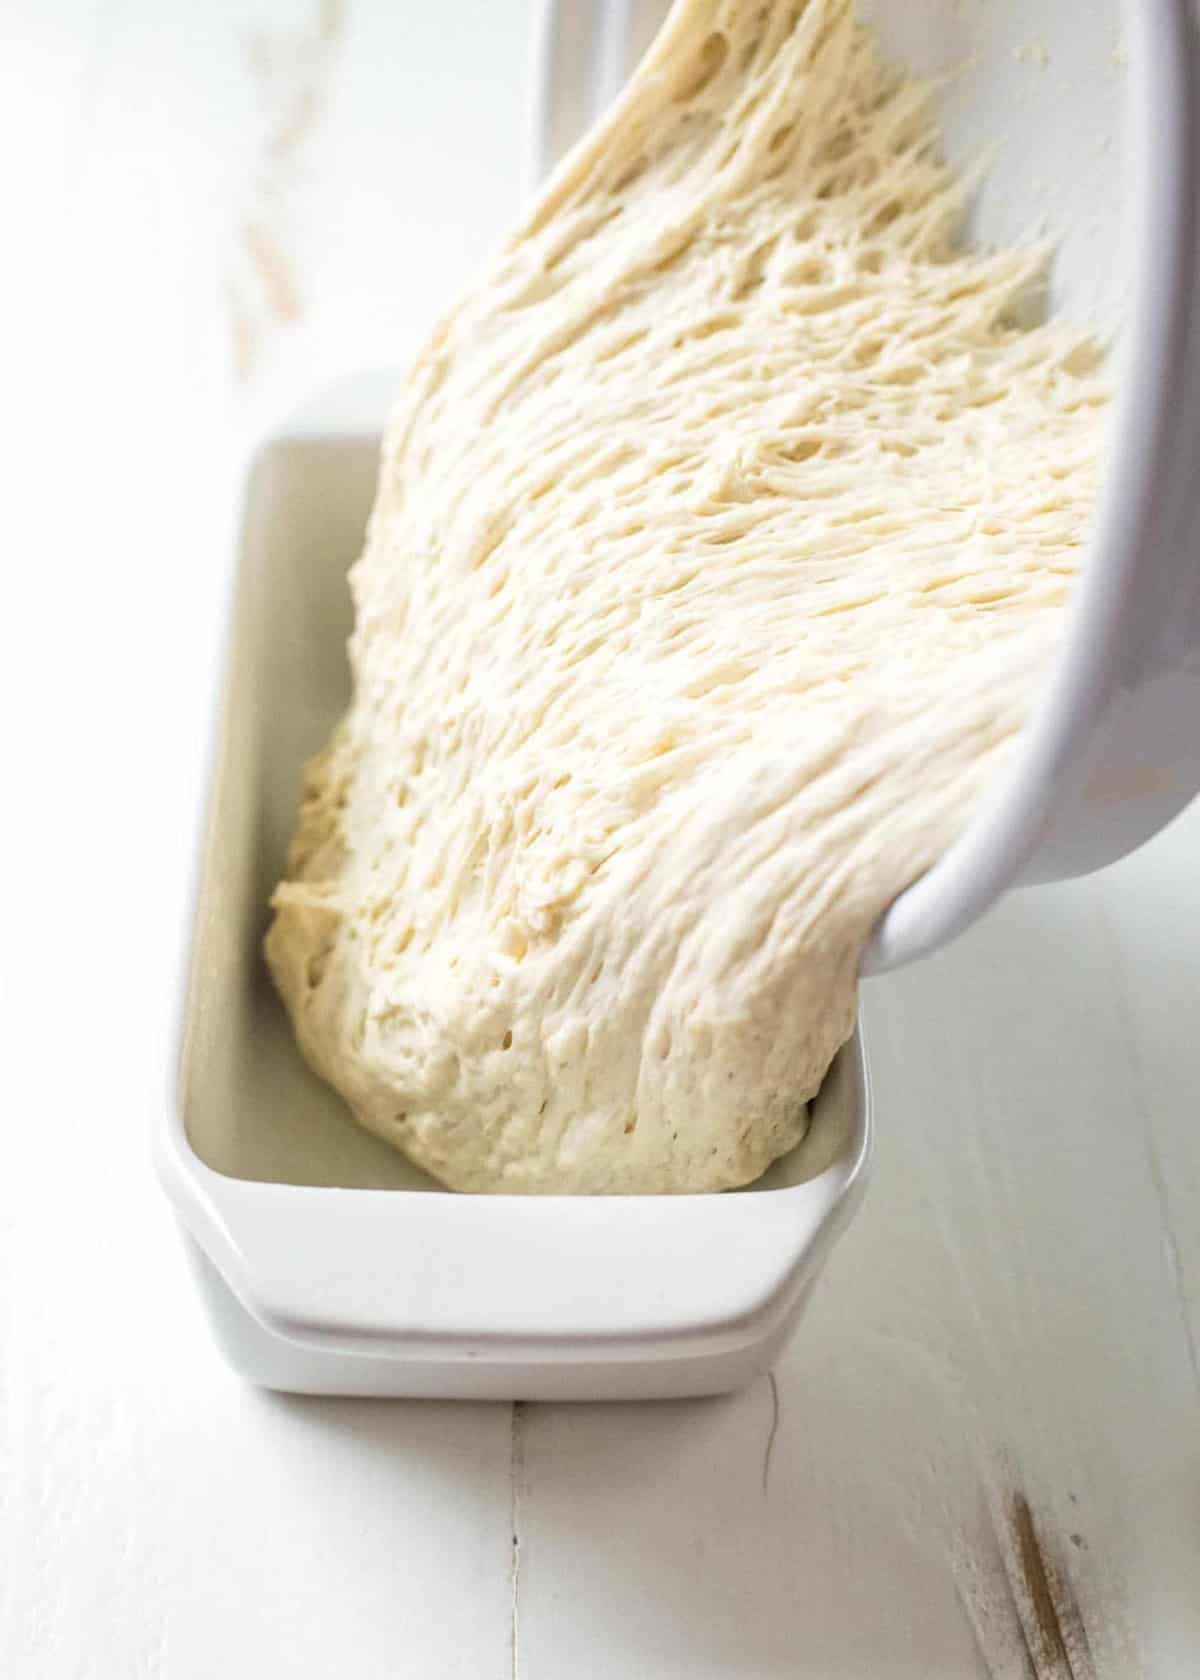 pouring No knead sandwich bread dough into a loaf pan